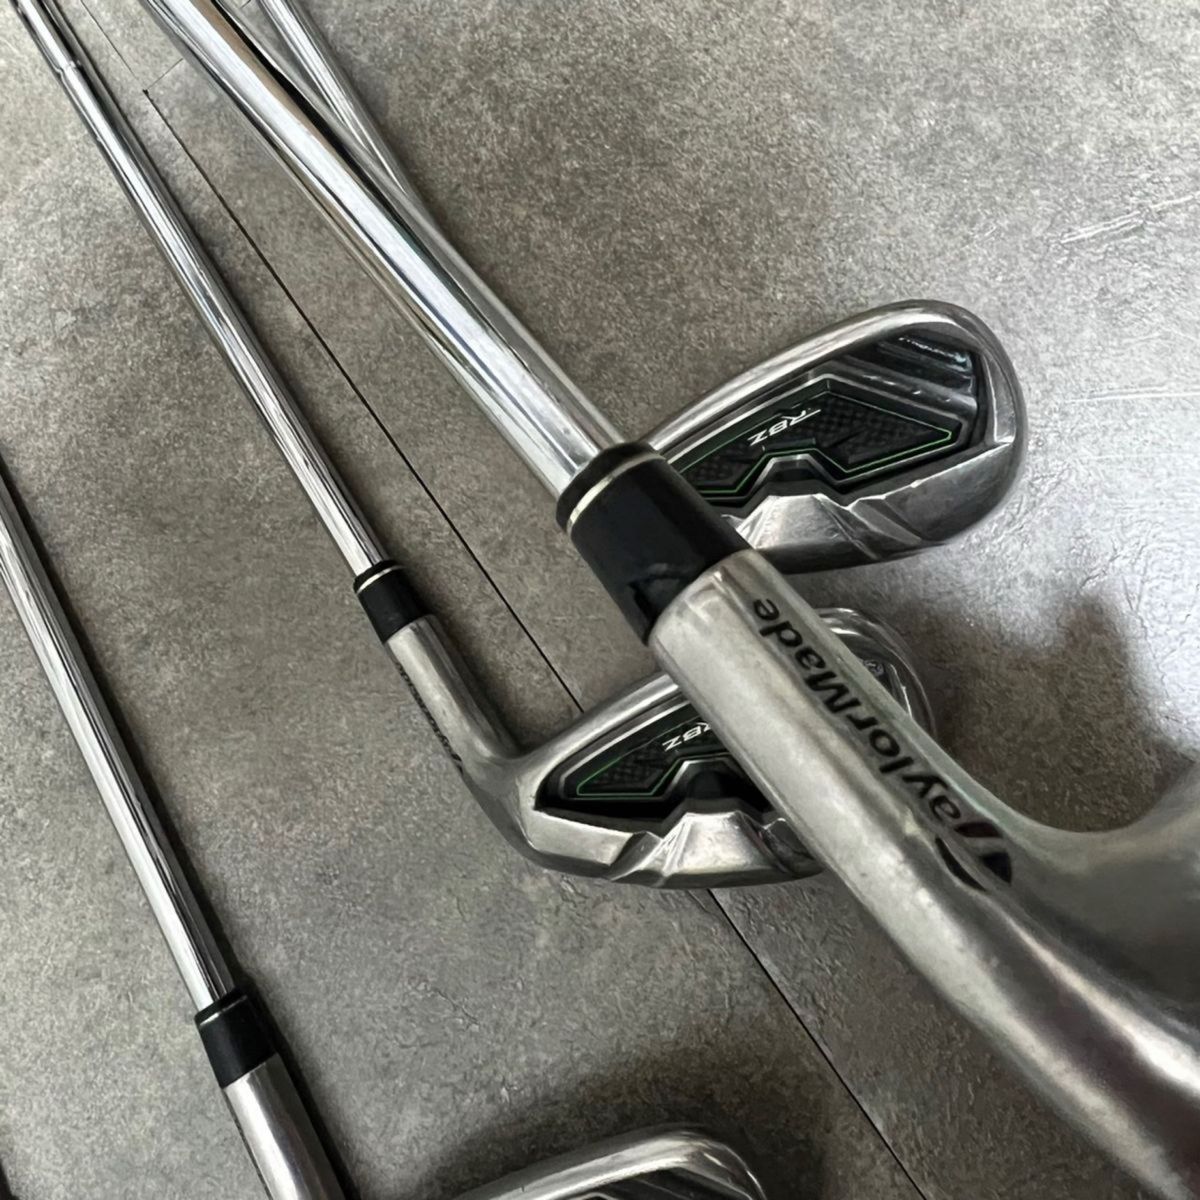 Taylor Made RBZ アイアン6本セット